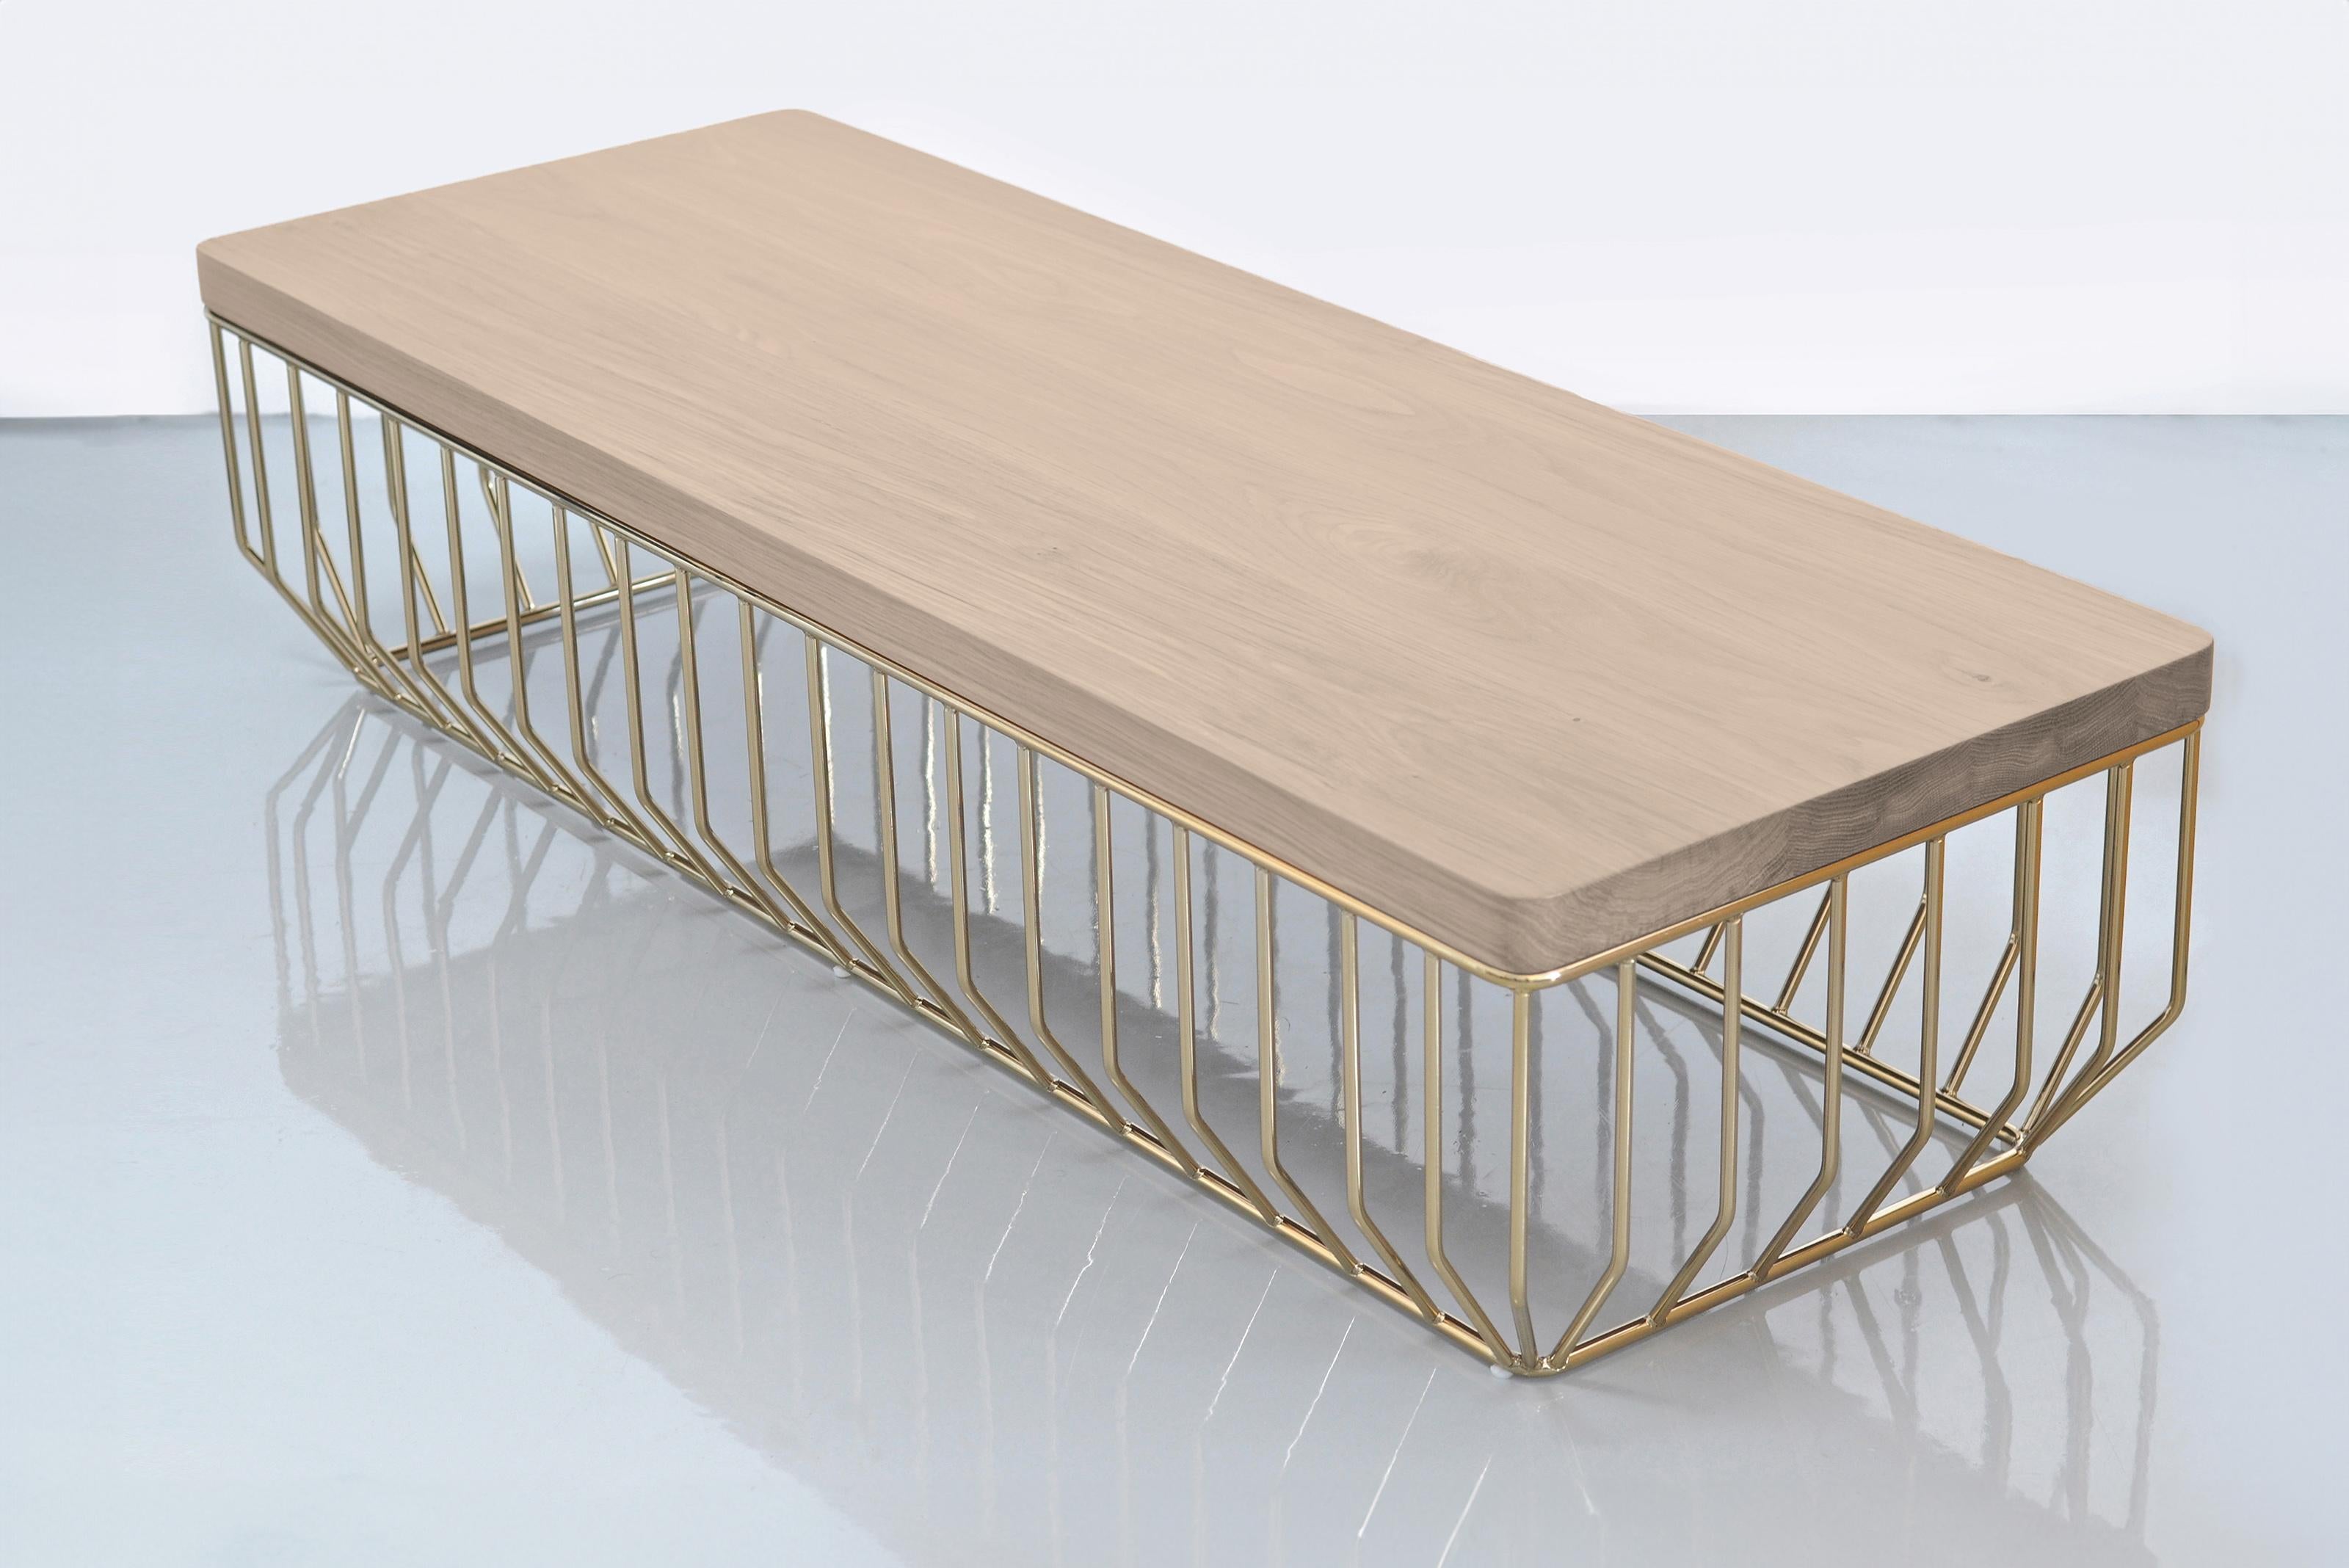 Wired Bench by Phase Design
Dimensions: D 152.4 x W 55.9 x H 34.9 cm. 
Materials: Smoked brass metal and white oak.

Solid steel bar with upholstered or solid wooden tops, available in walnut, white oak, or ebonized oak. Steel bar available in gloss